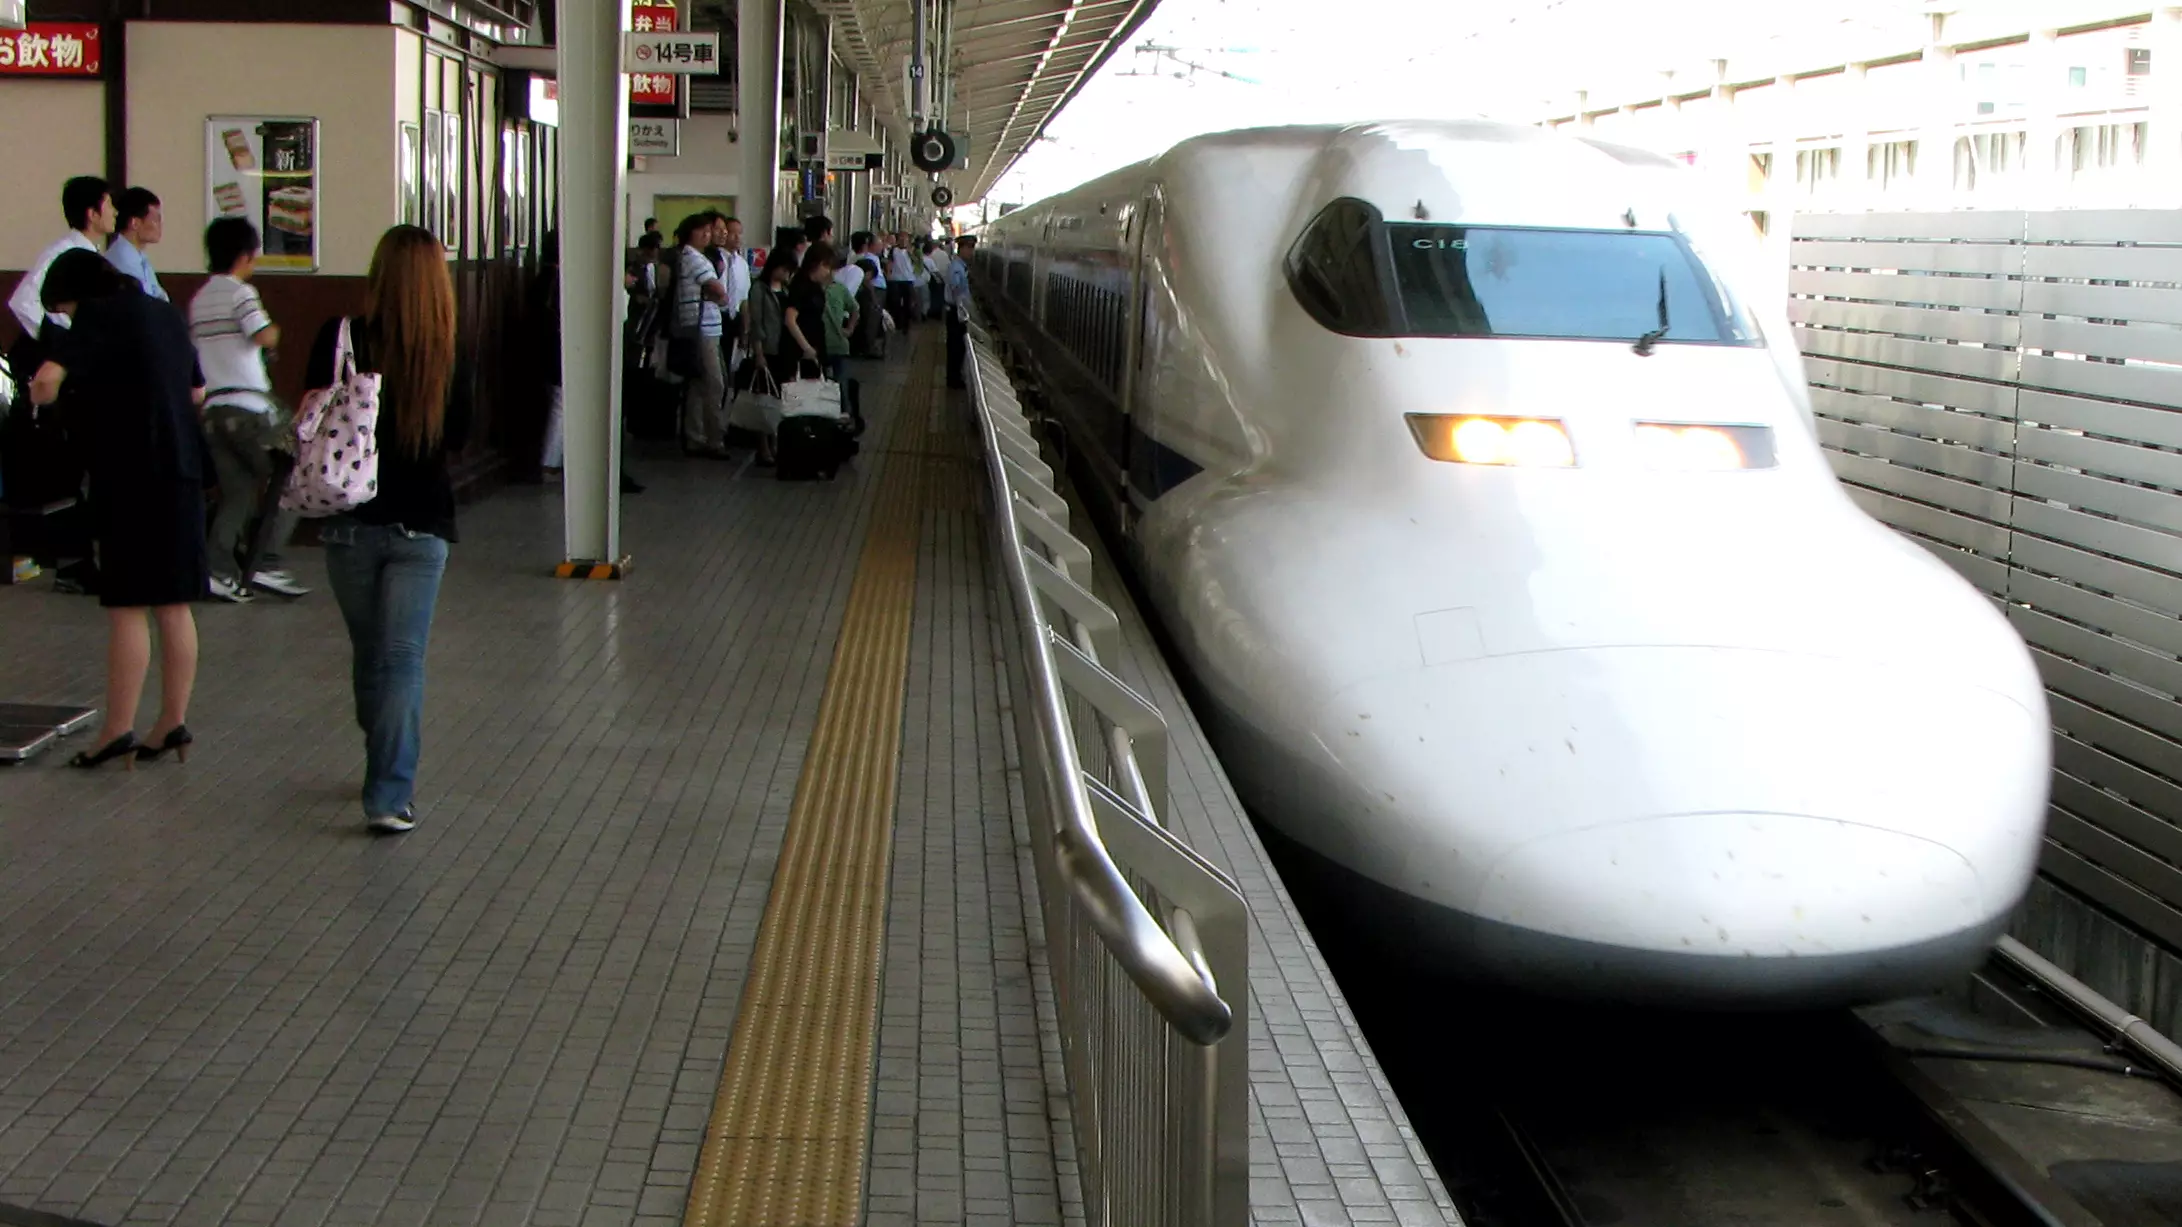 Japanese Train Company Apologises After Train Leaves 25 Seconds Early 